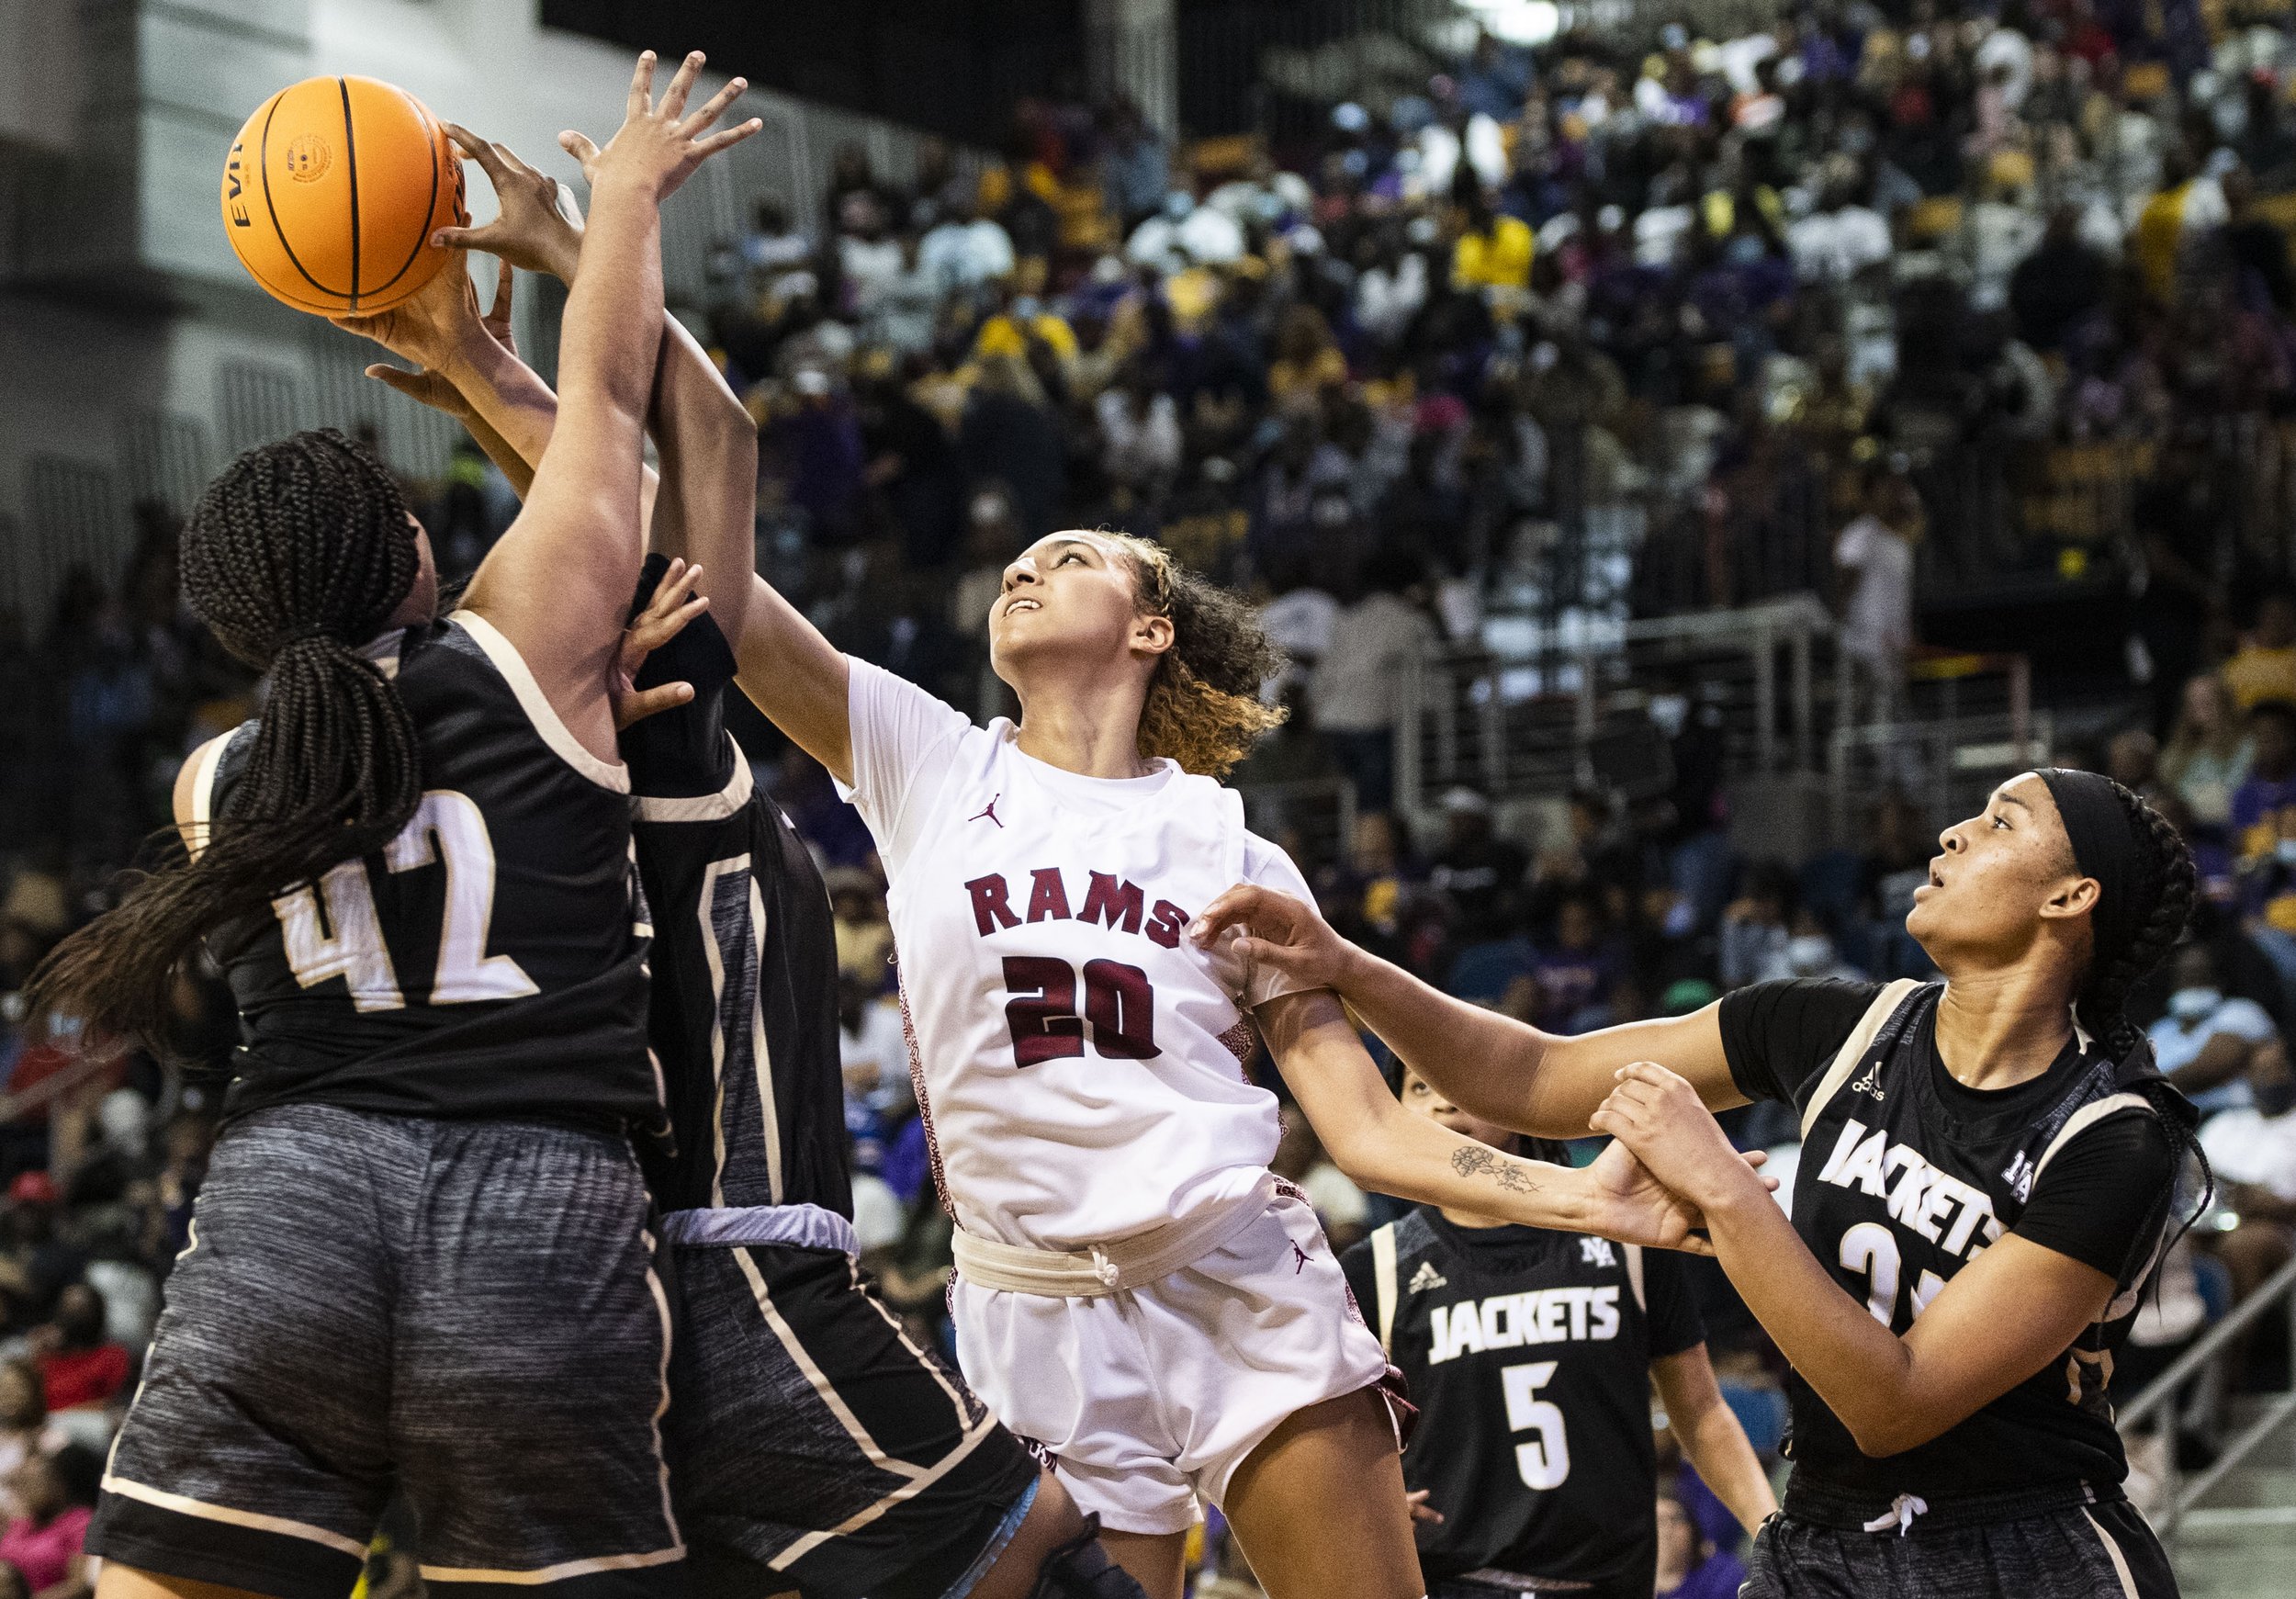  Westside's Olivia Eandolph (20) battles for a rebound against North Augusta's during the Class AAAA in the SCHSL state championship game at the USC Aiken Convocation Center Saturday, March 5, 2022.     